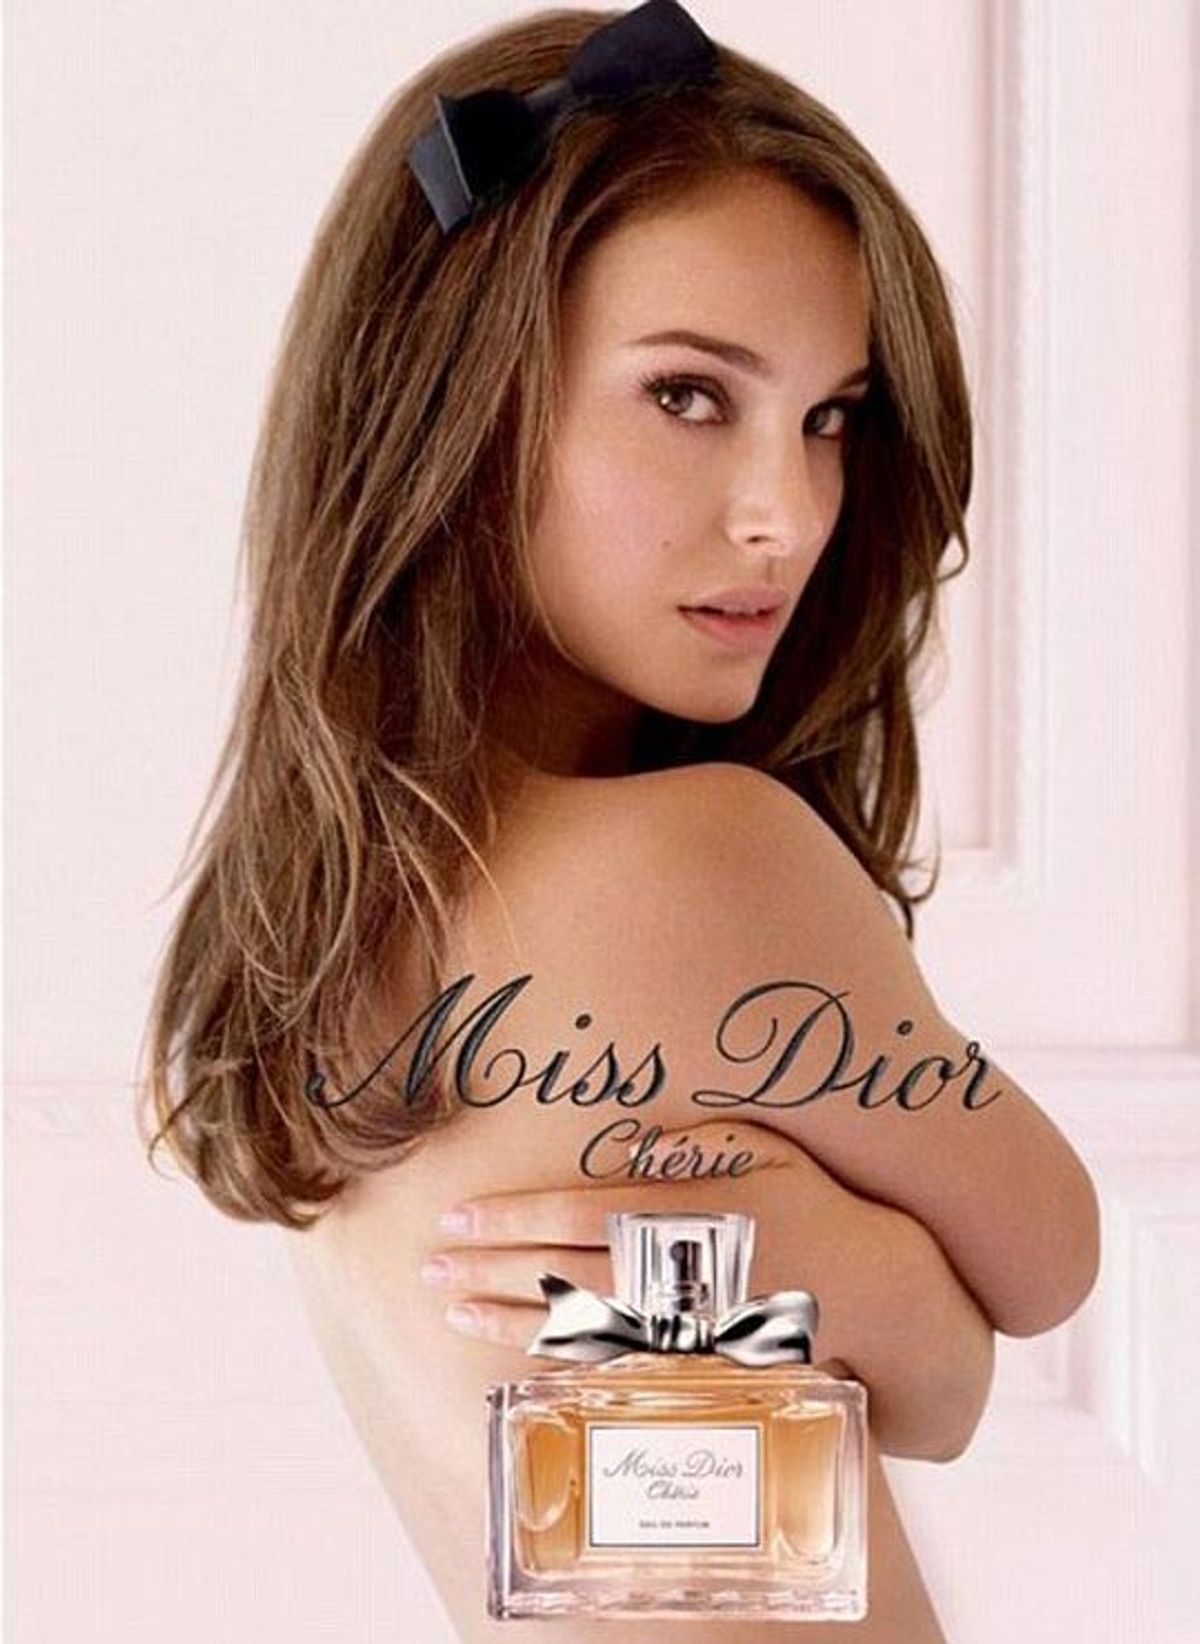 Detail from Natalie Portman's Miss Dior campaign   